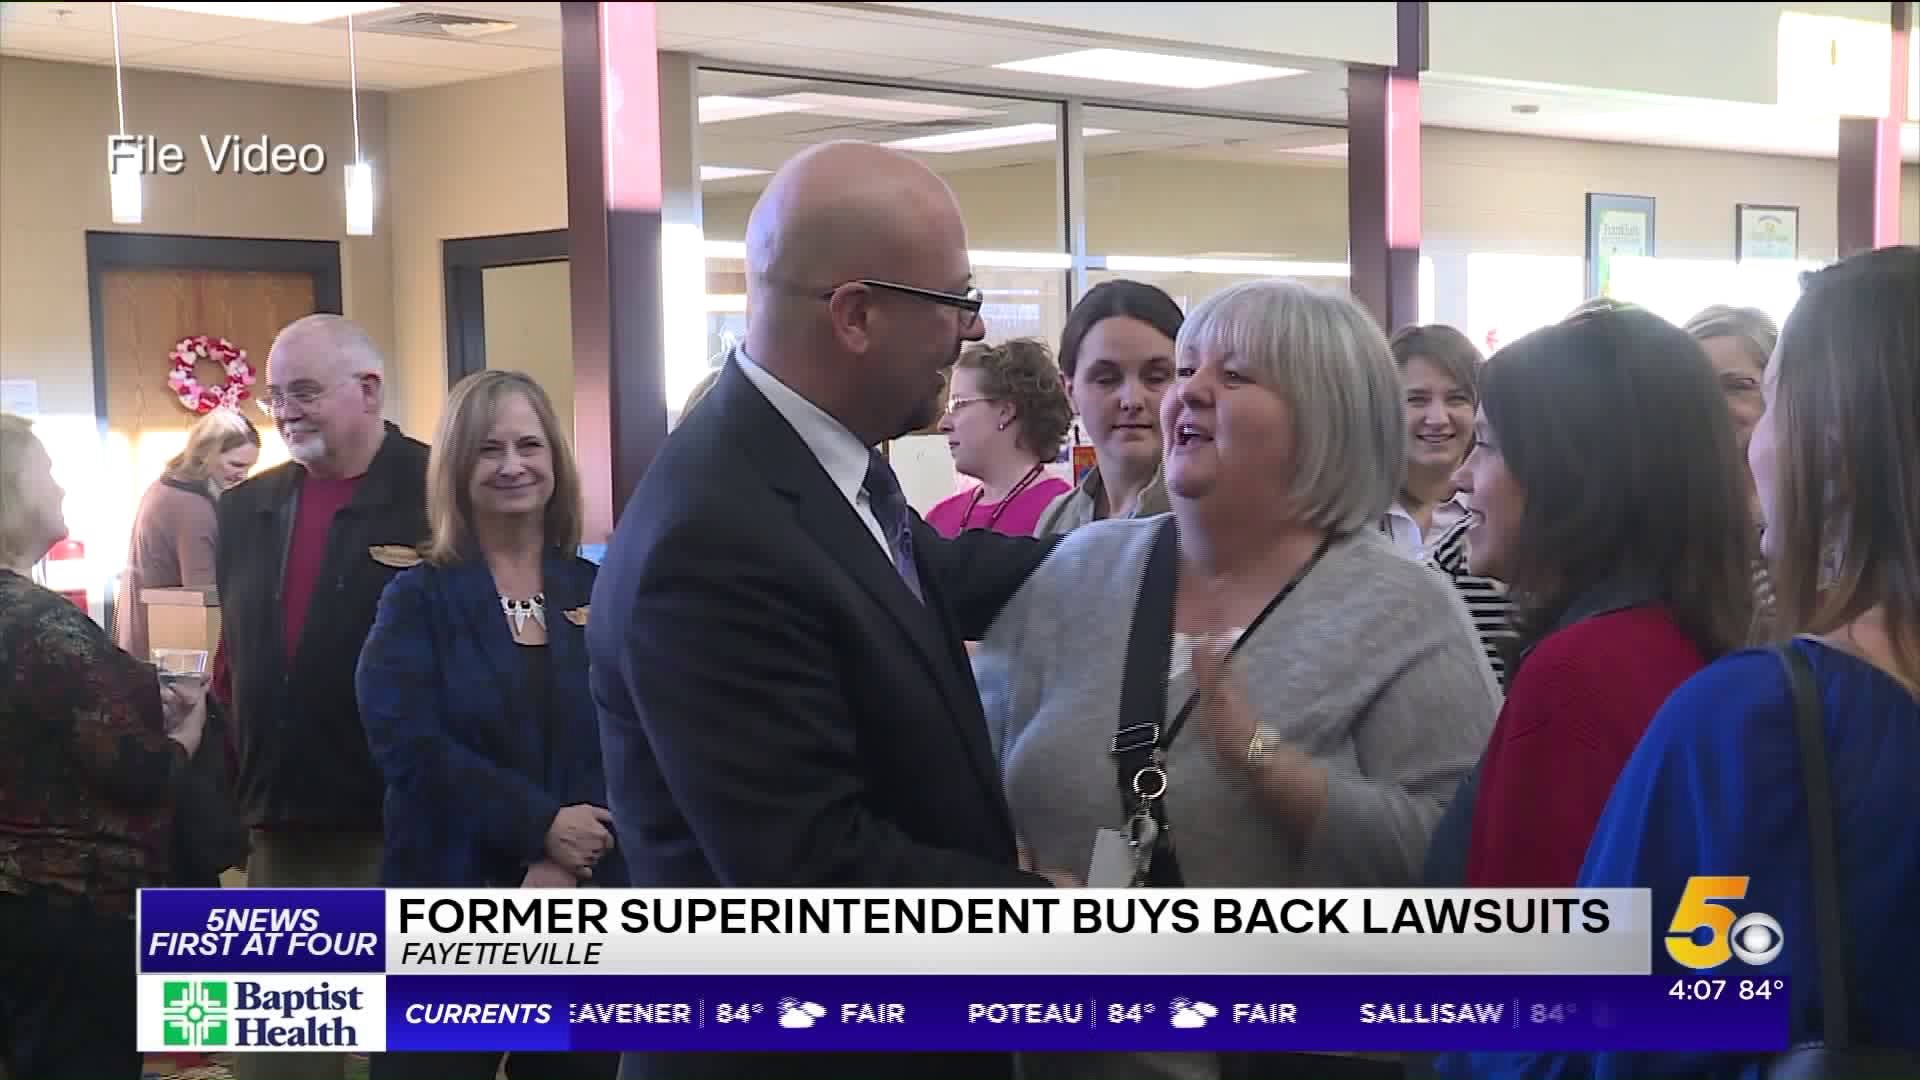 Former Fayetteville Superintendent Buys Back Lawsuits